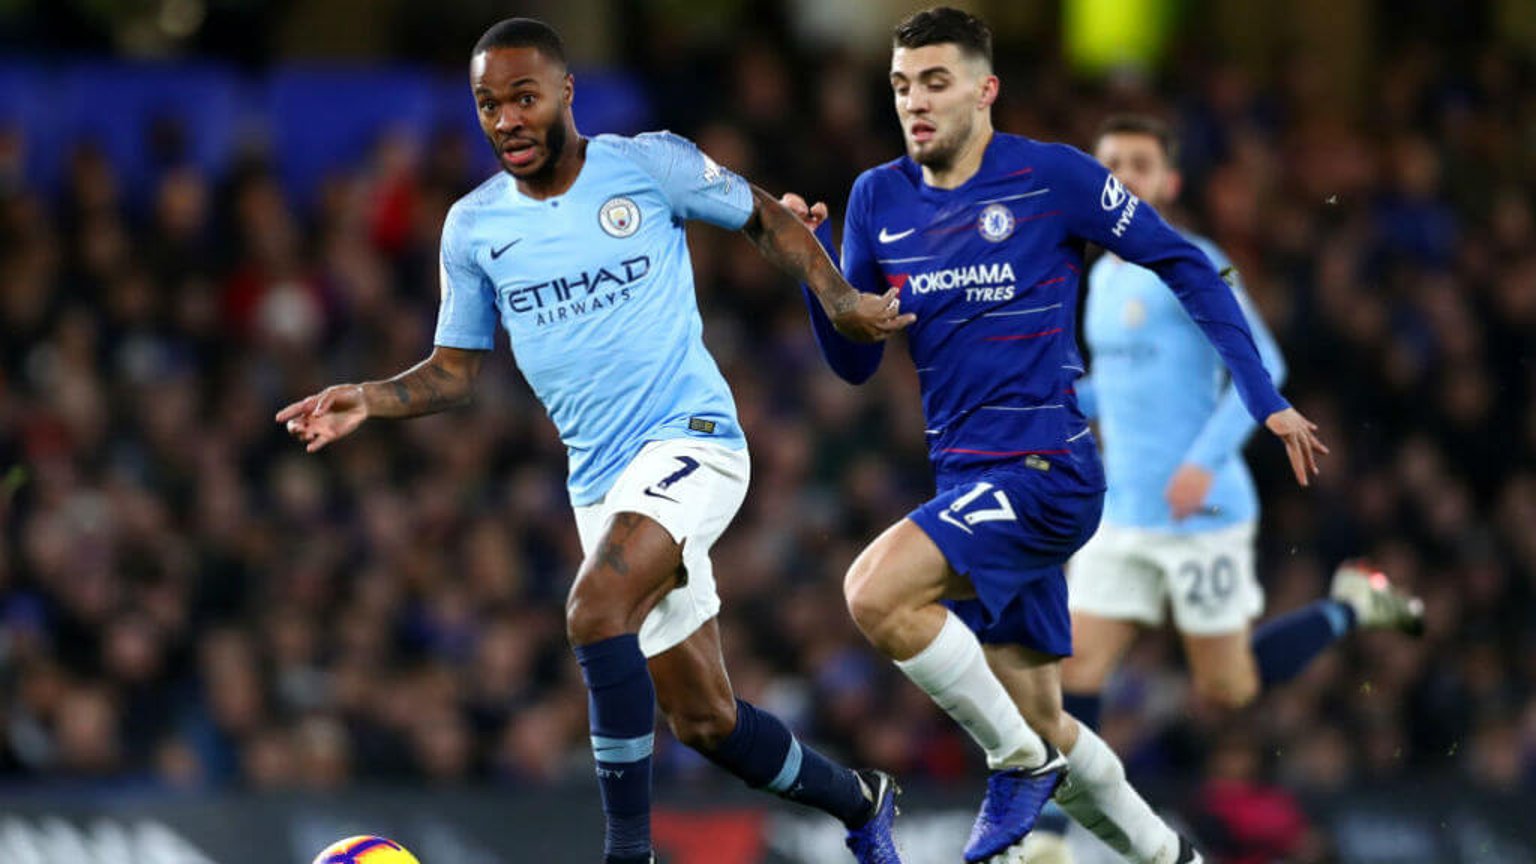 RACING CLEAR: Sterling shows his pace early on